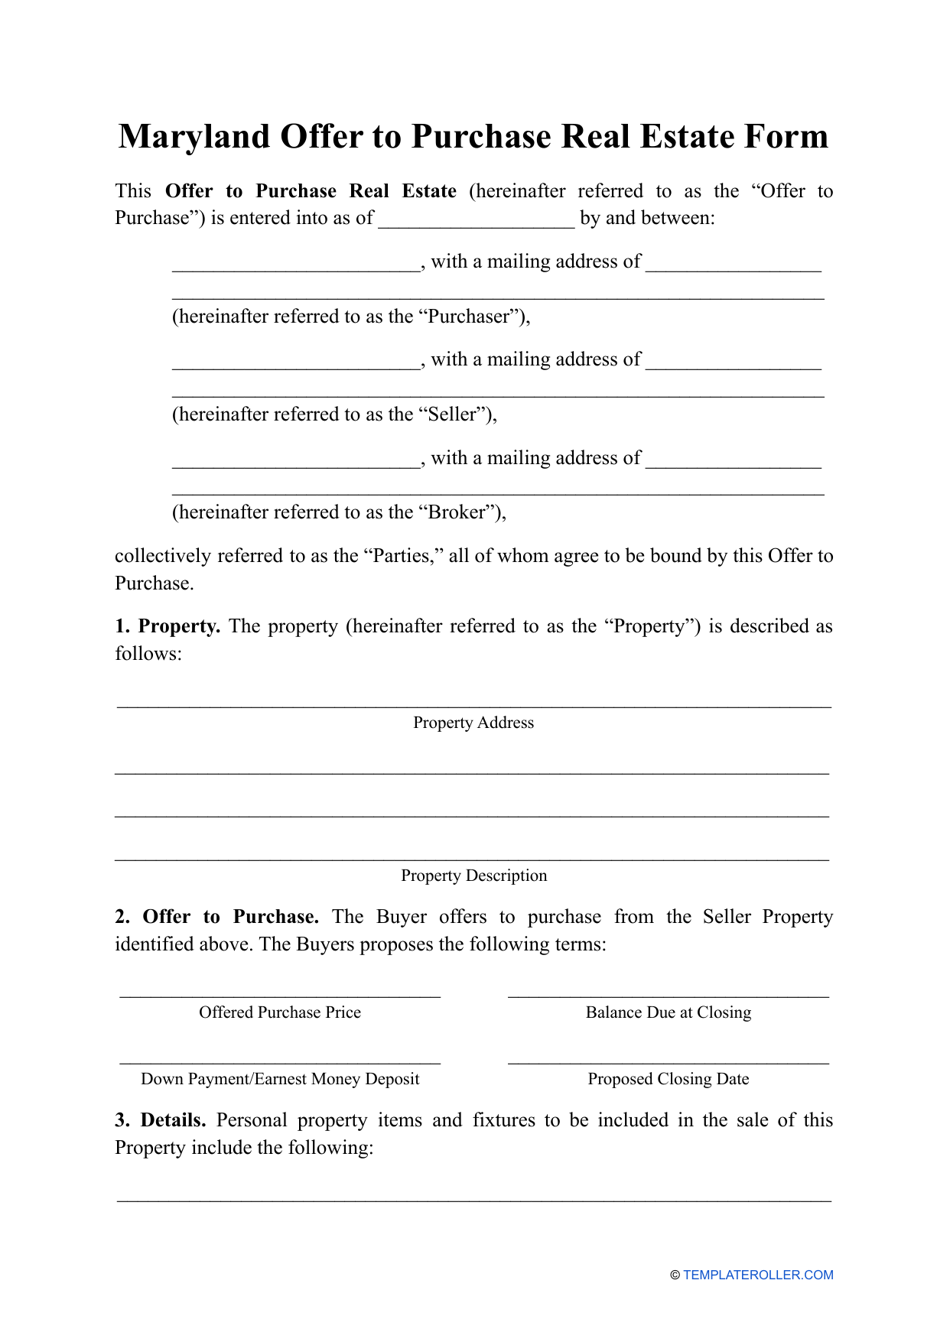 Offer to Purchase Real Estate Form - Maryland, Page 1